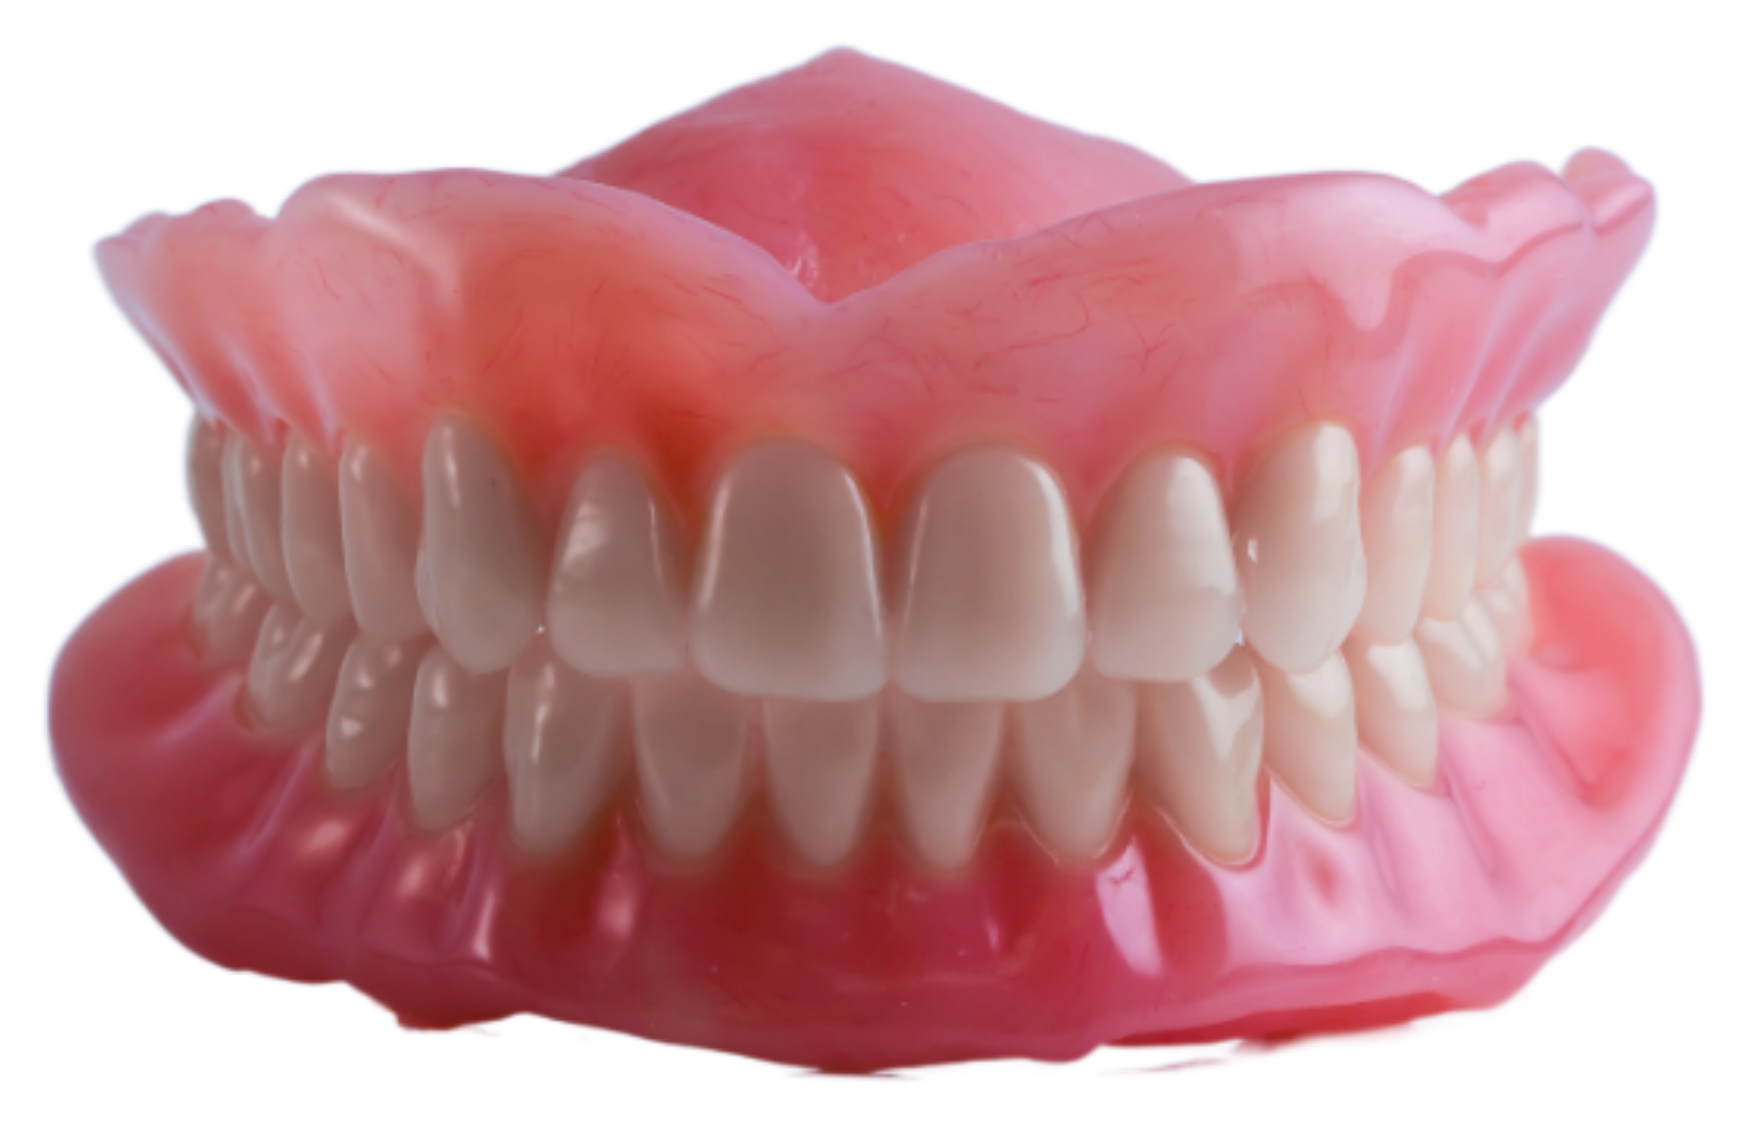 Traditional Dentures ($1,500 - $3,000 per arch)